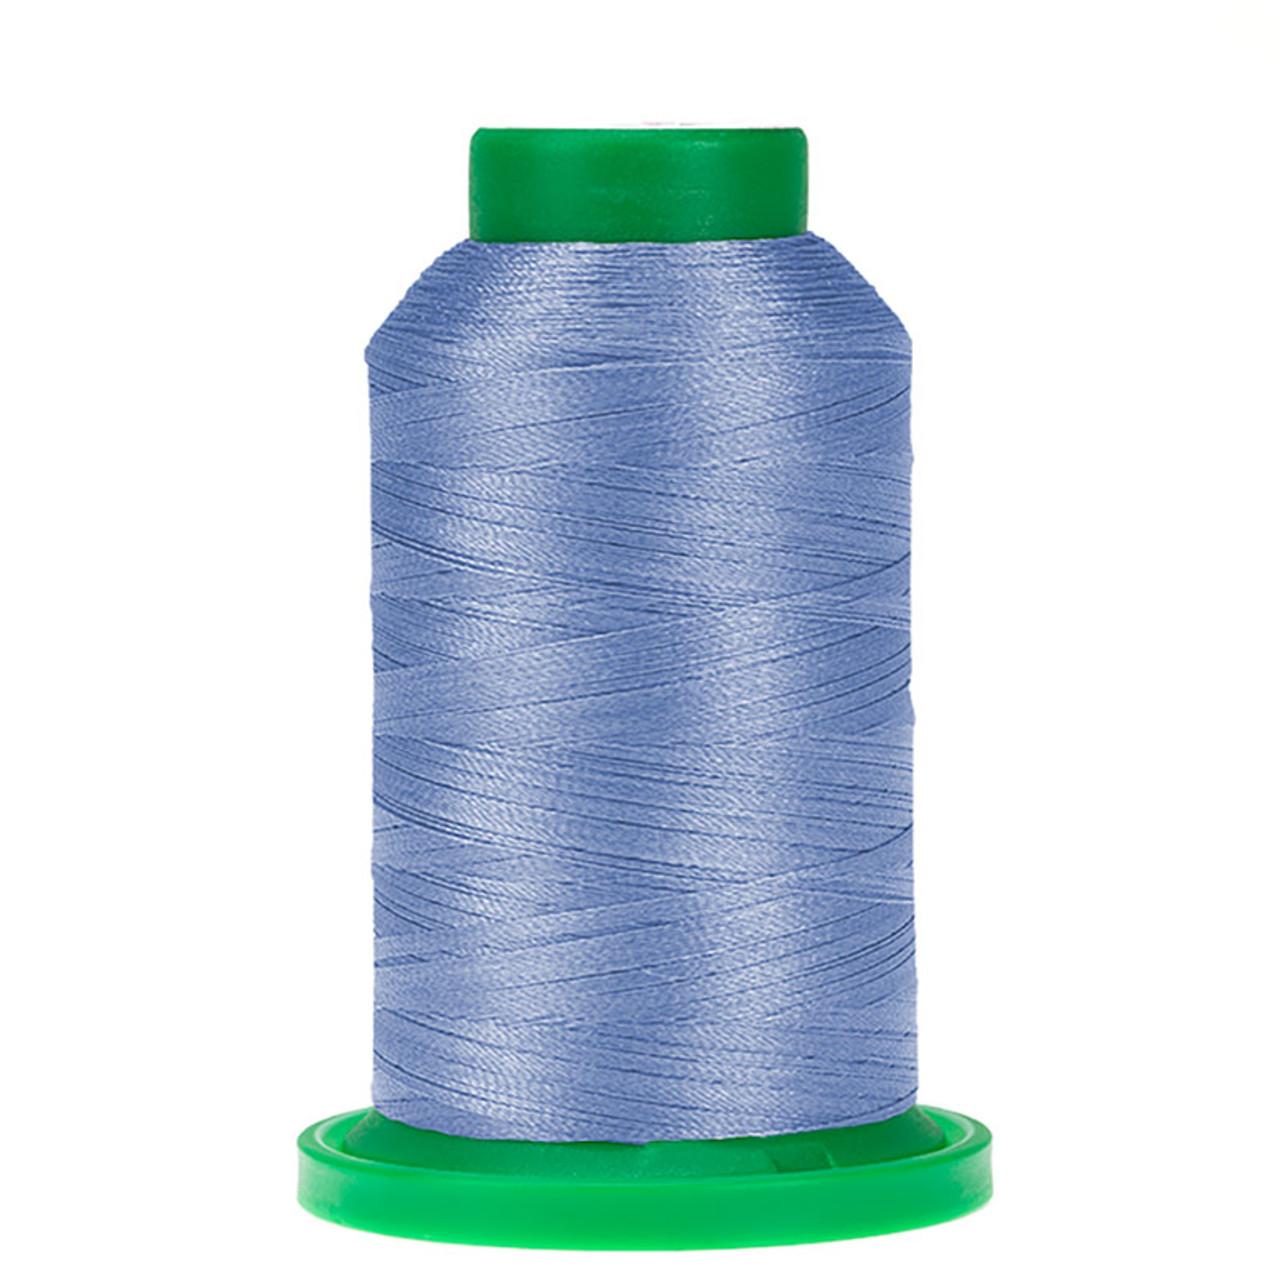 Thread, Isacord - Dolphin Blue - 2922-3711 - SPECIAL ORDER